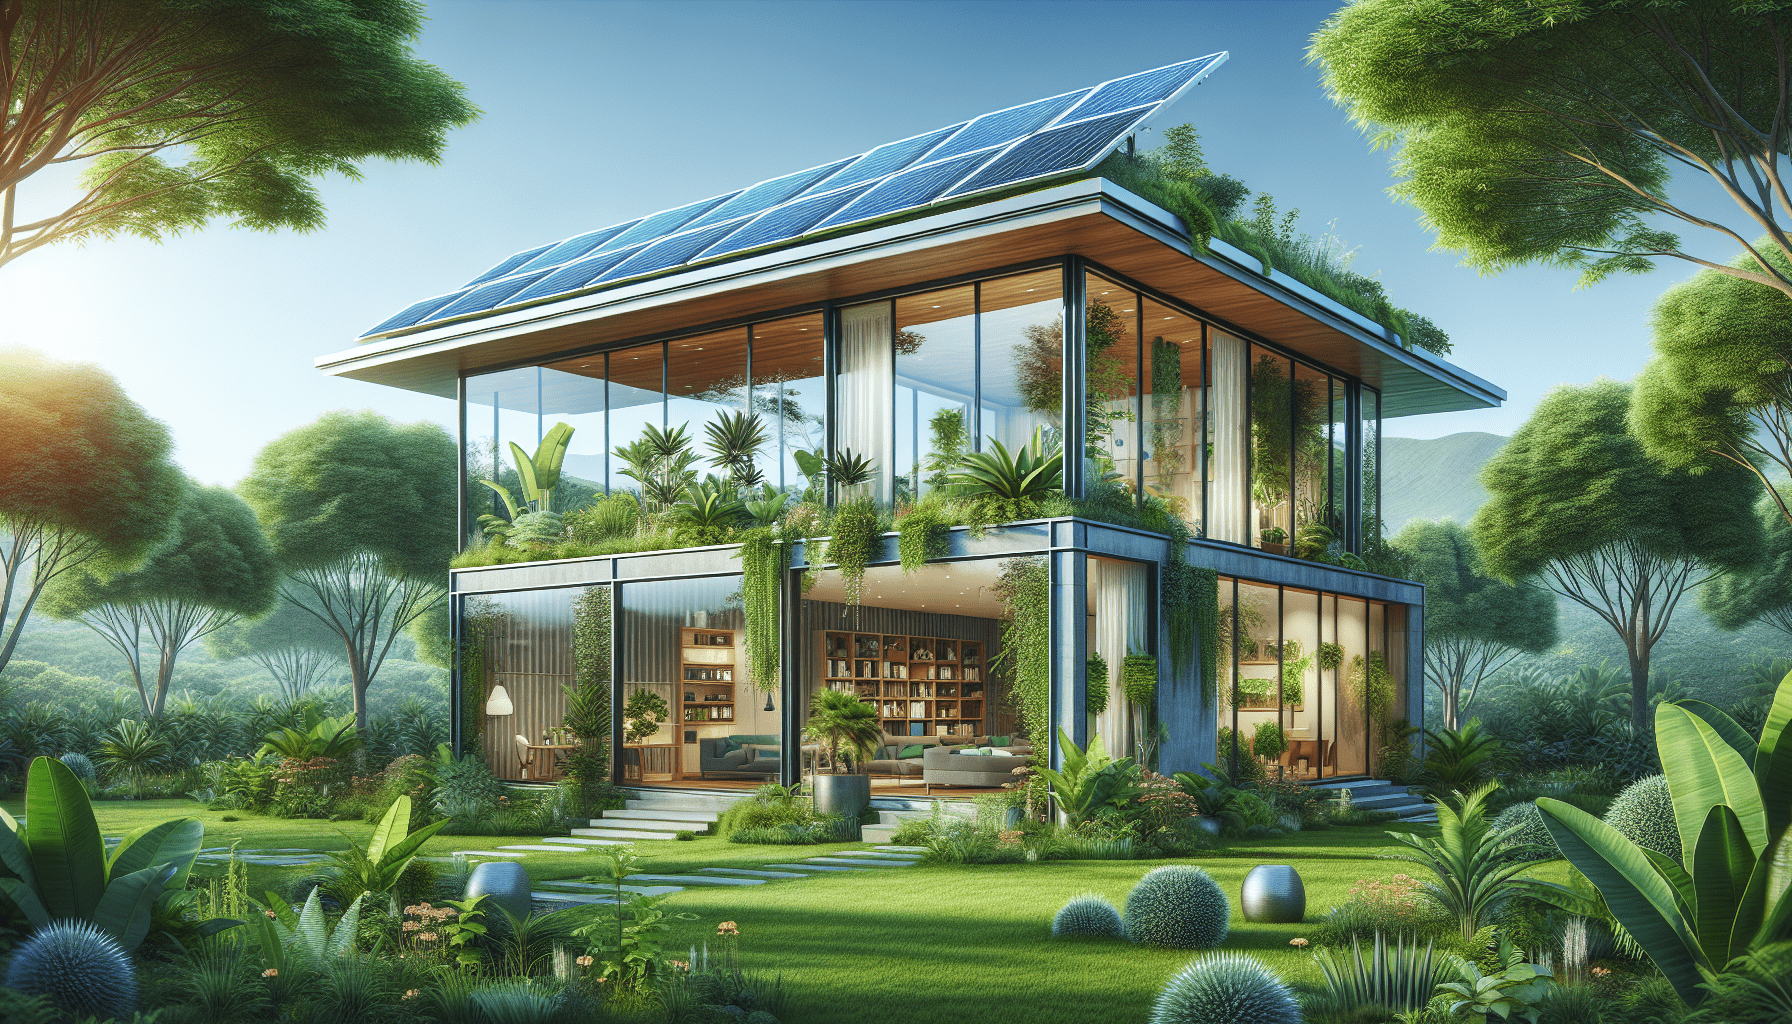 How Does Sustainable Architecture Impact Real Estate Values?